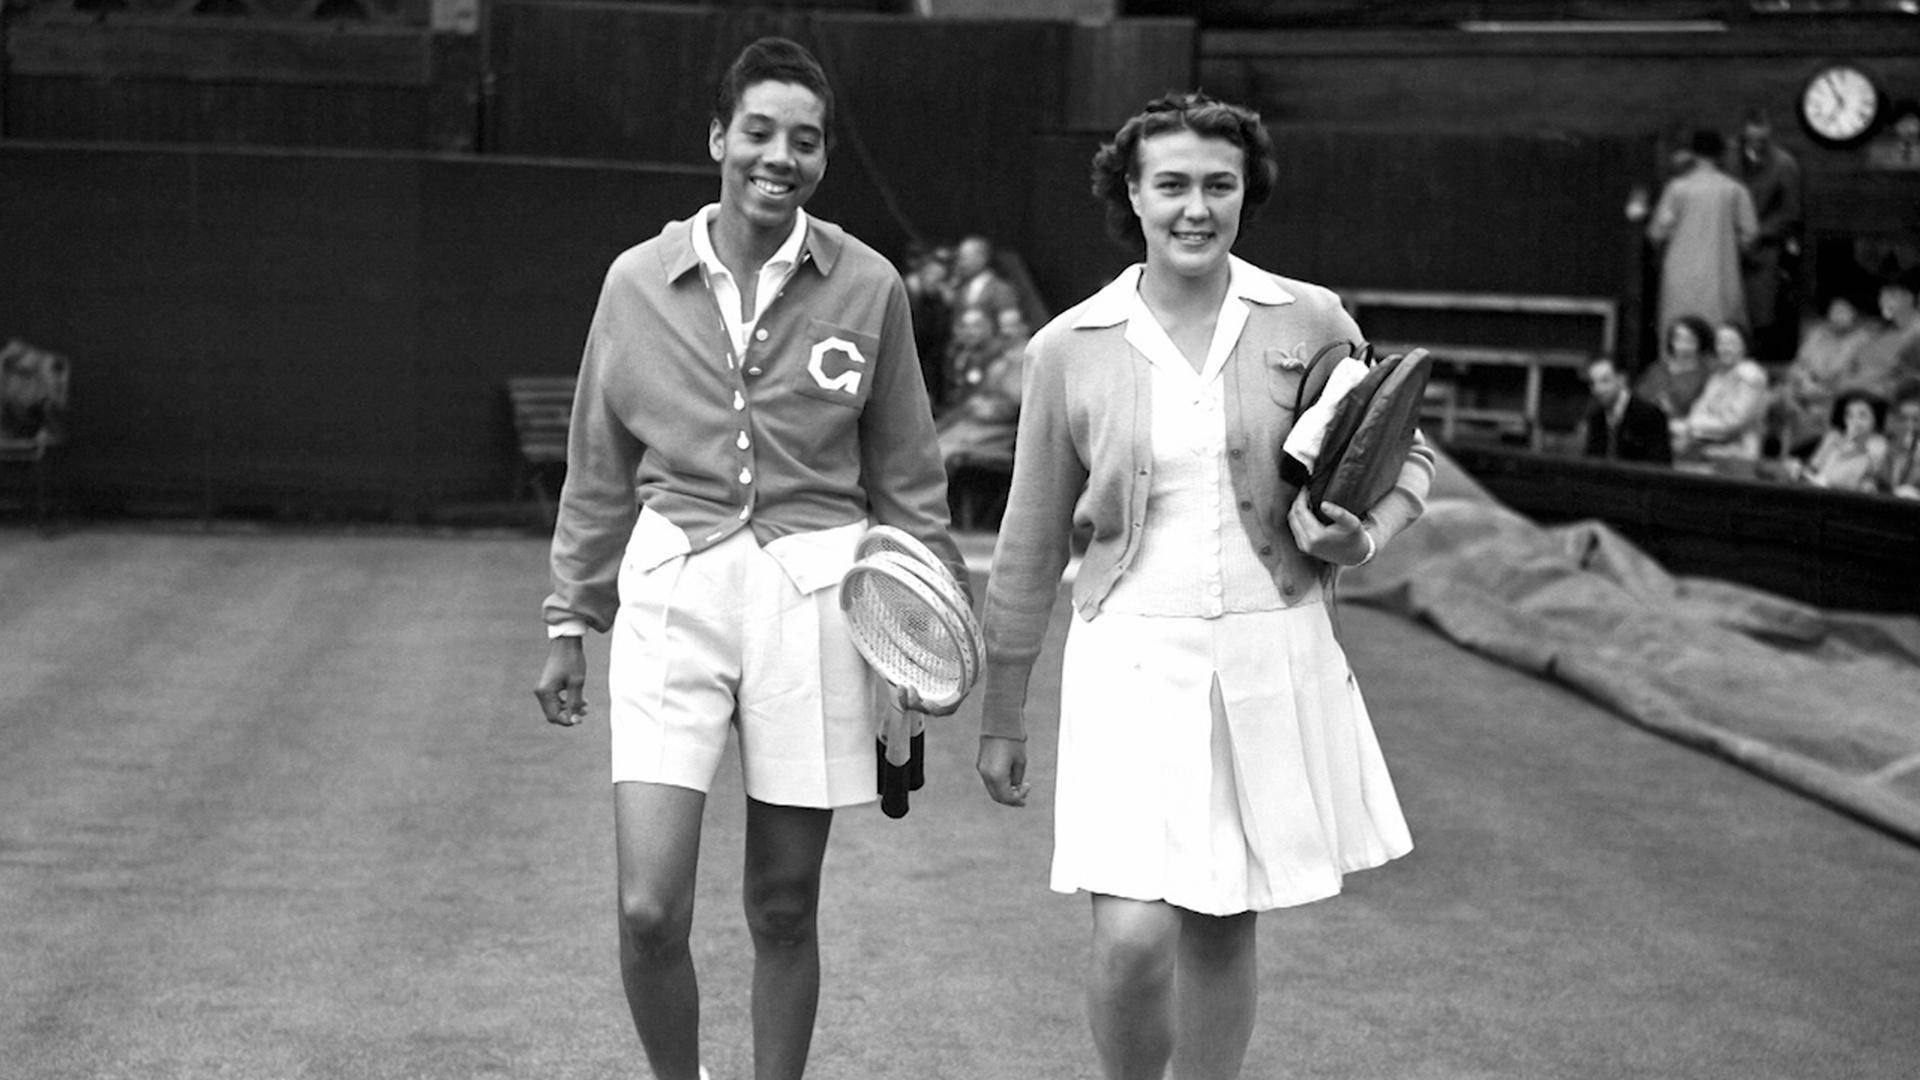 Althea Gibson and Angela Buxton Celebrating Tennis Victory Wallpaper